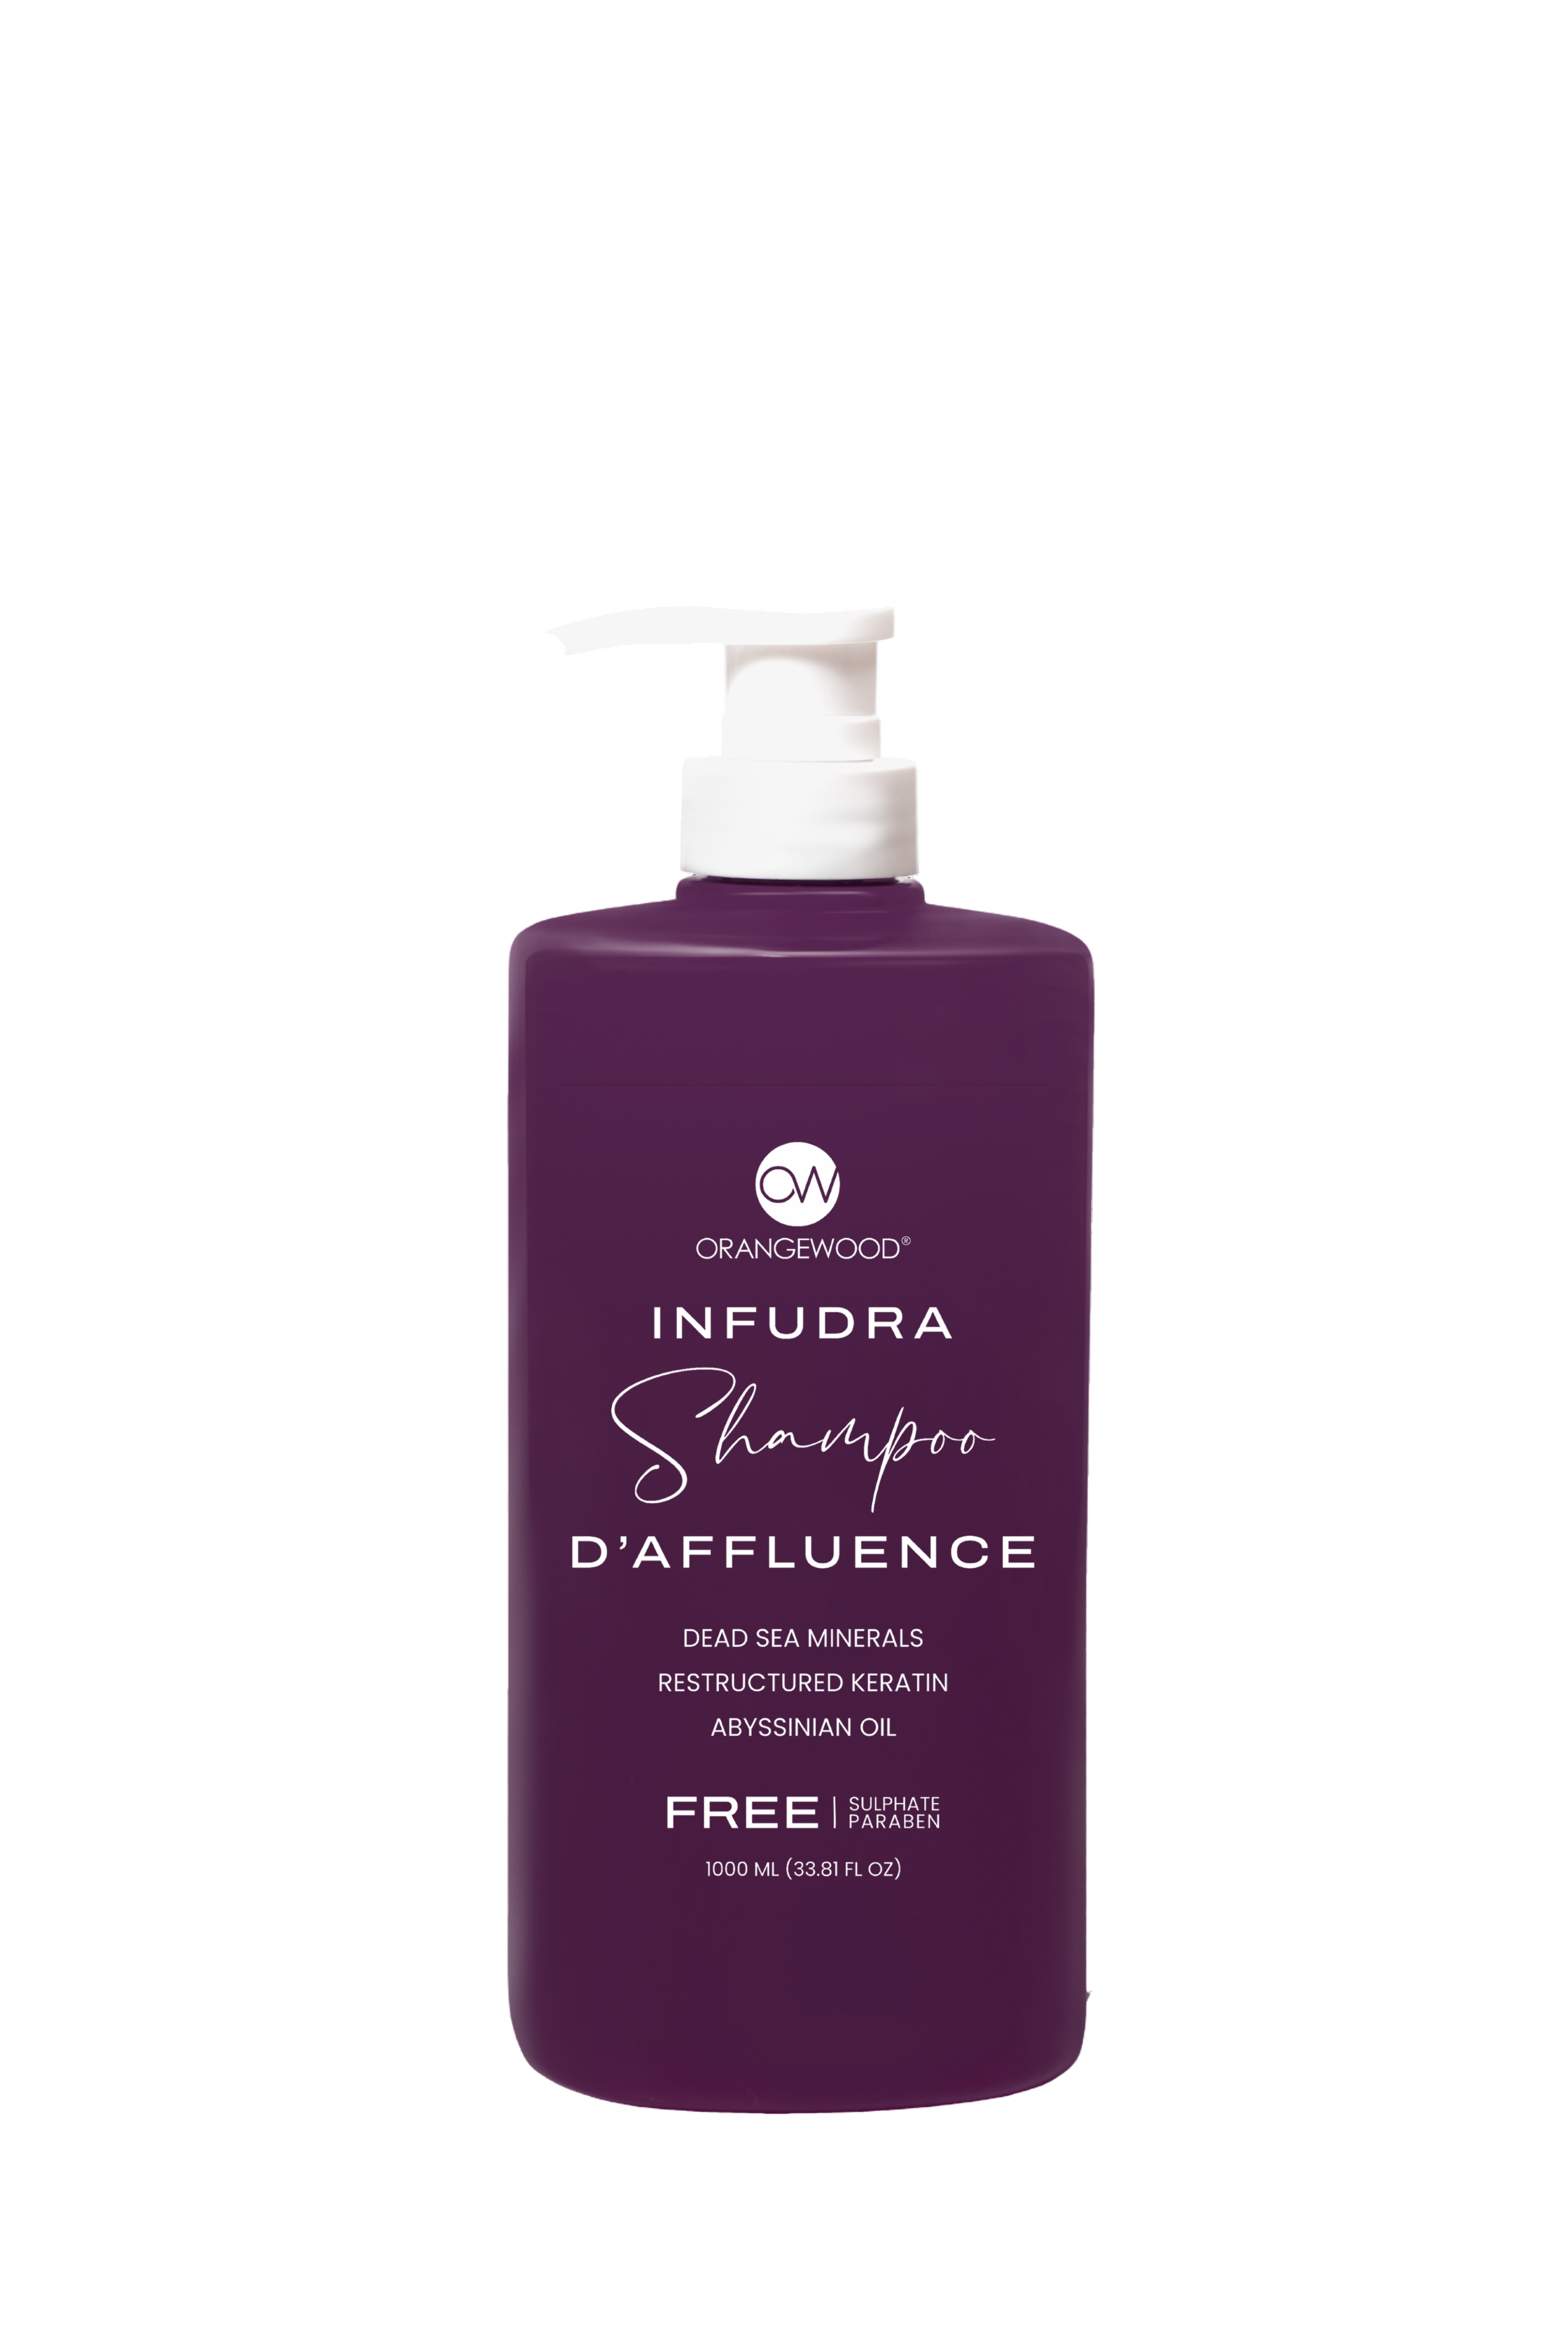 INFUDRA D'Affluence Shampoo Orangewood Sulphate & Paraben Free (Imported) For Men and Women 300ML